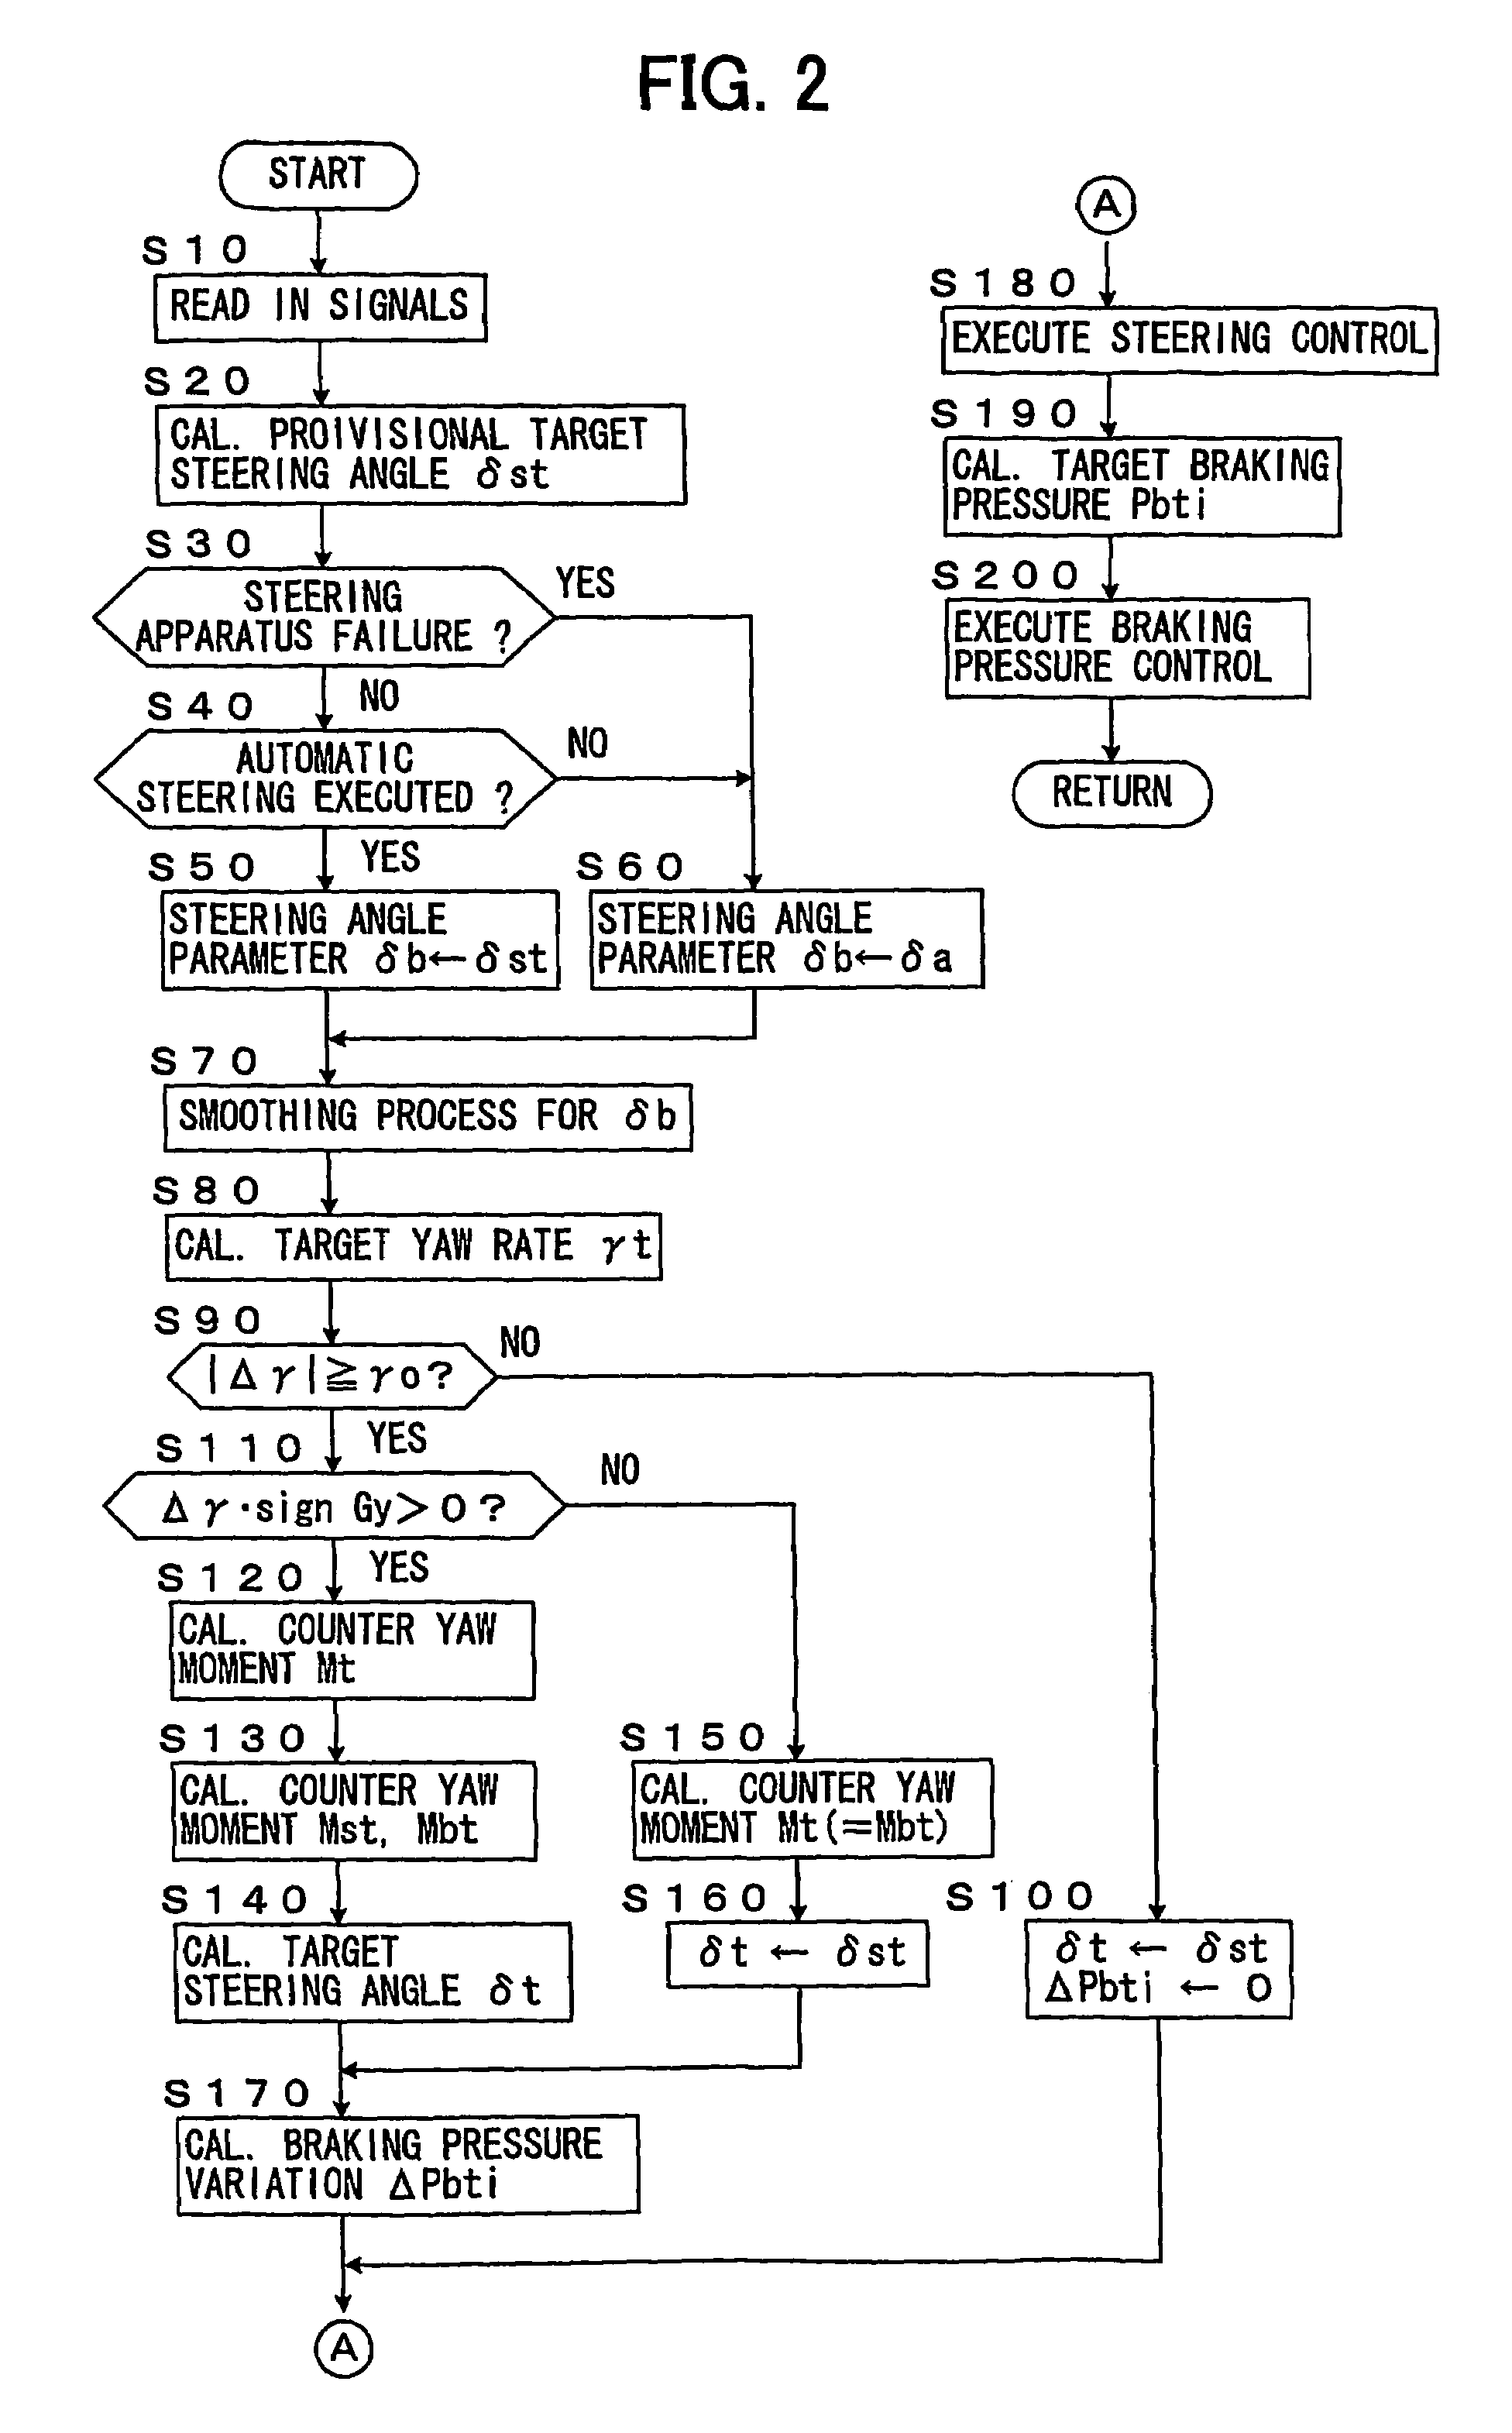 Vehicle stability control device